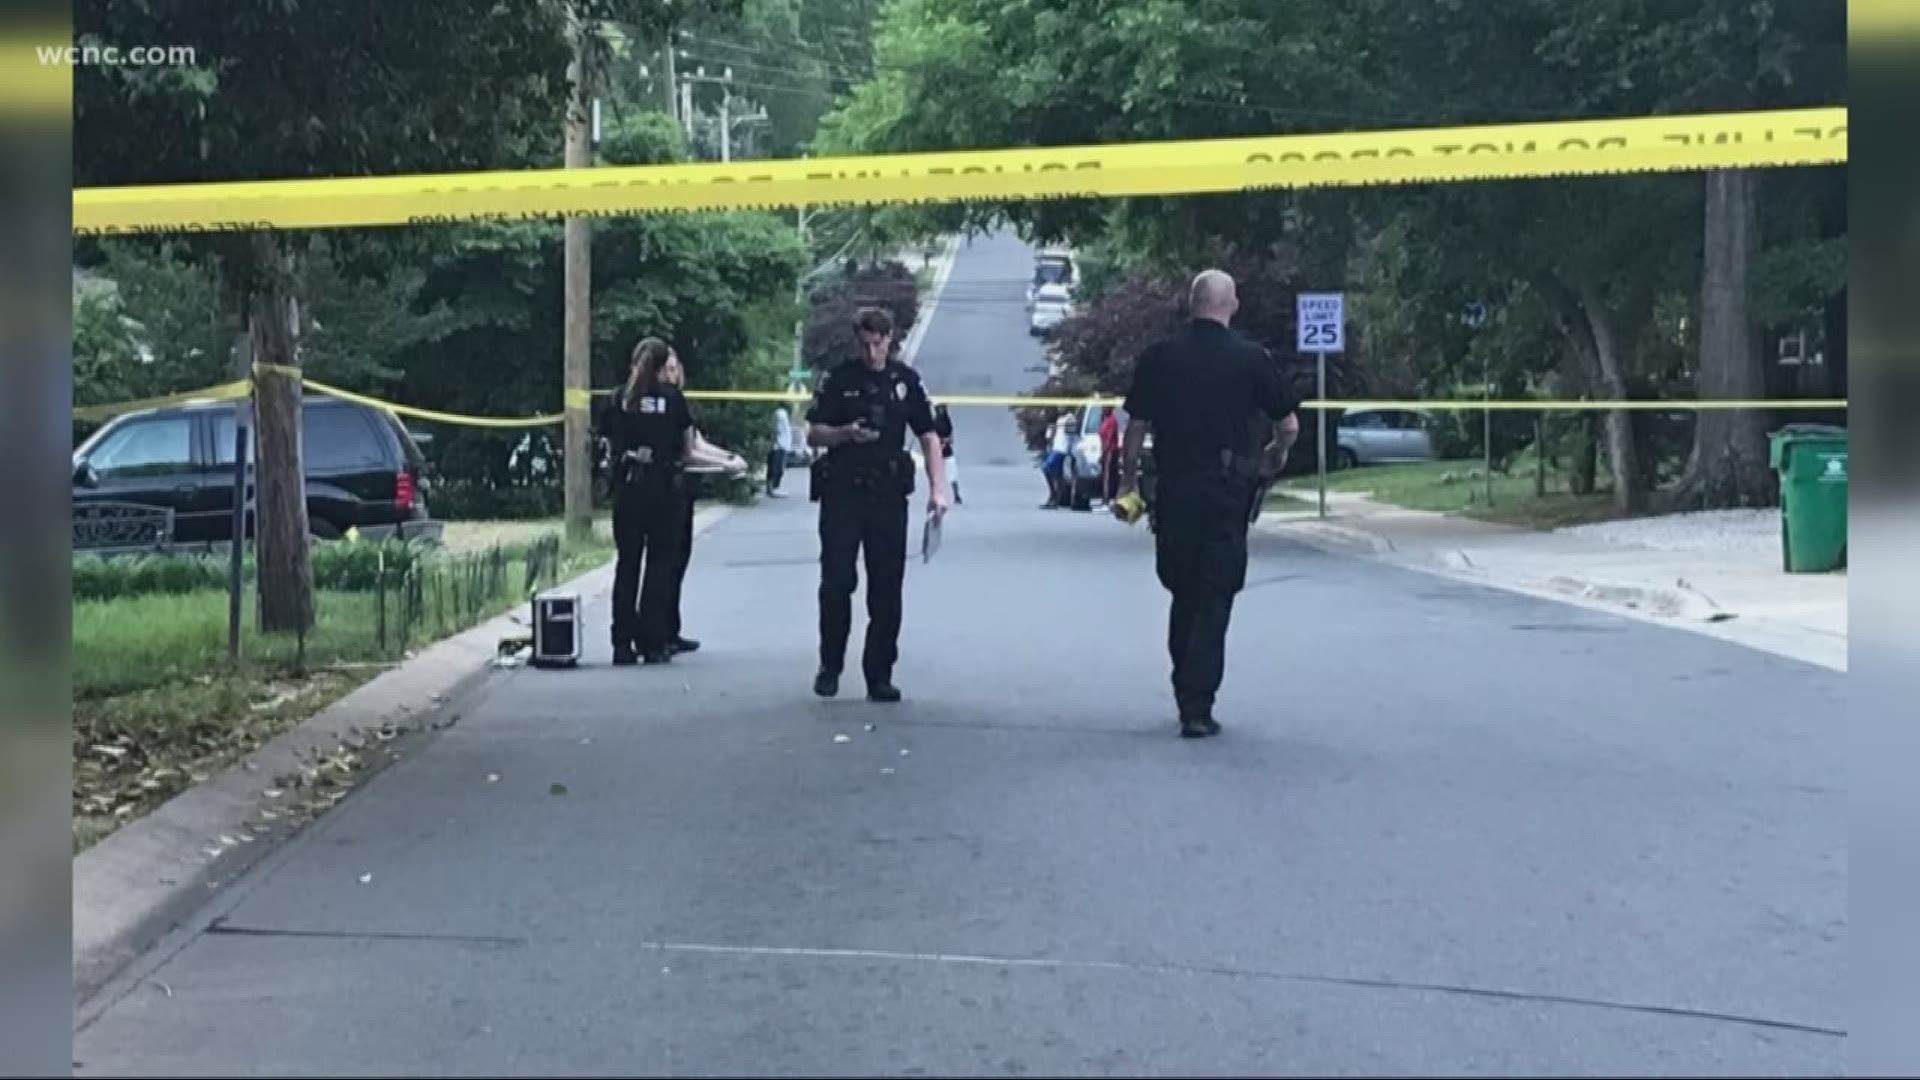 She was found shot in an apartment on Catherine Simmons Avenue around 7:30 p.m. Saturday and later died at the hospital. It was the second deadly shooting on that north Charlotte street in less than a month.